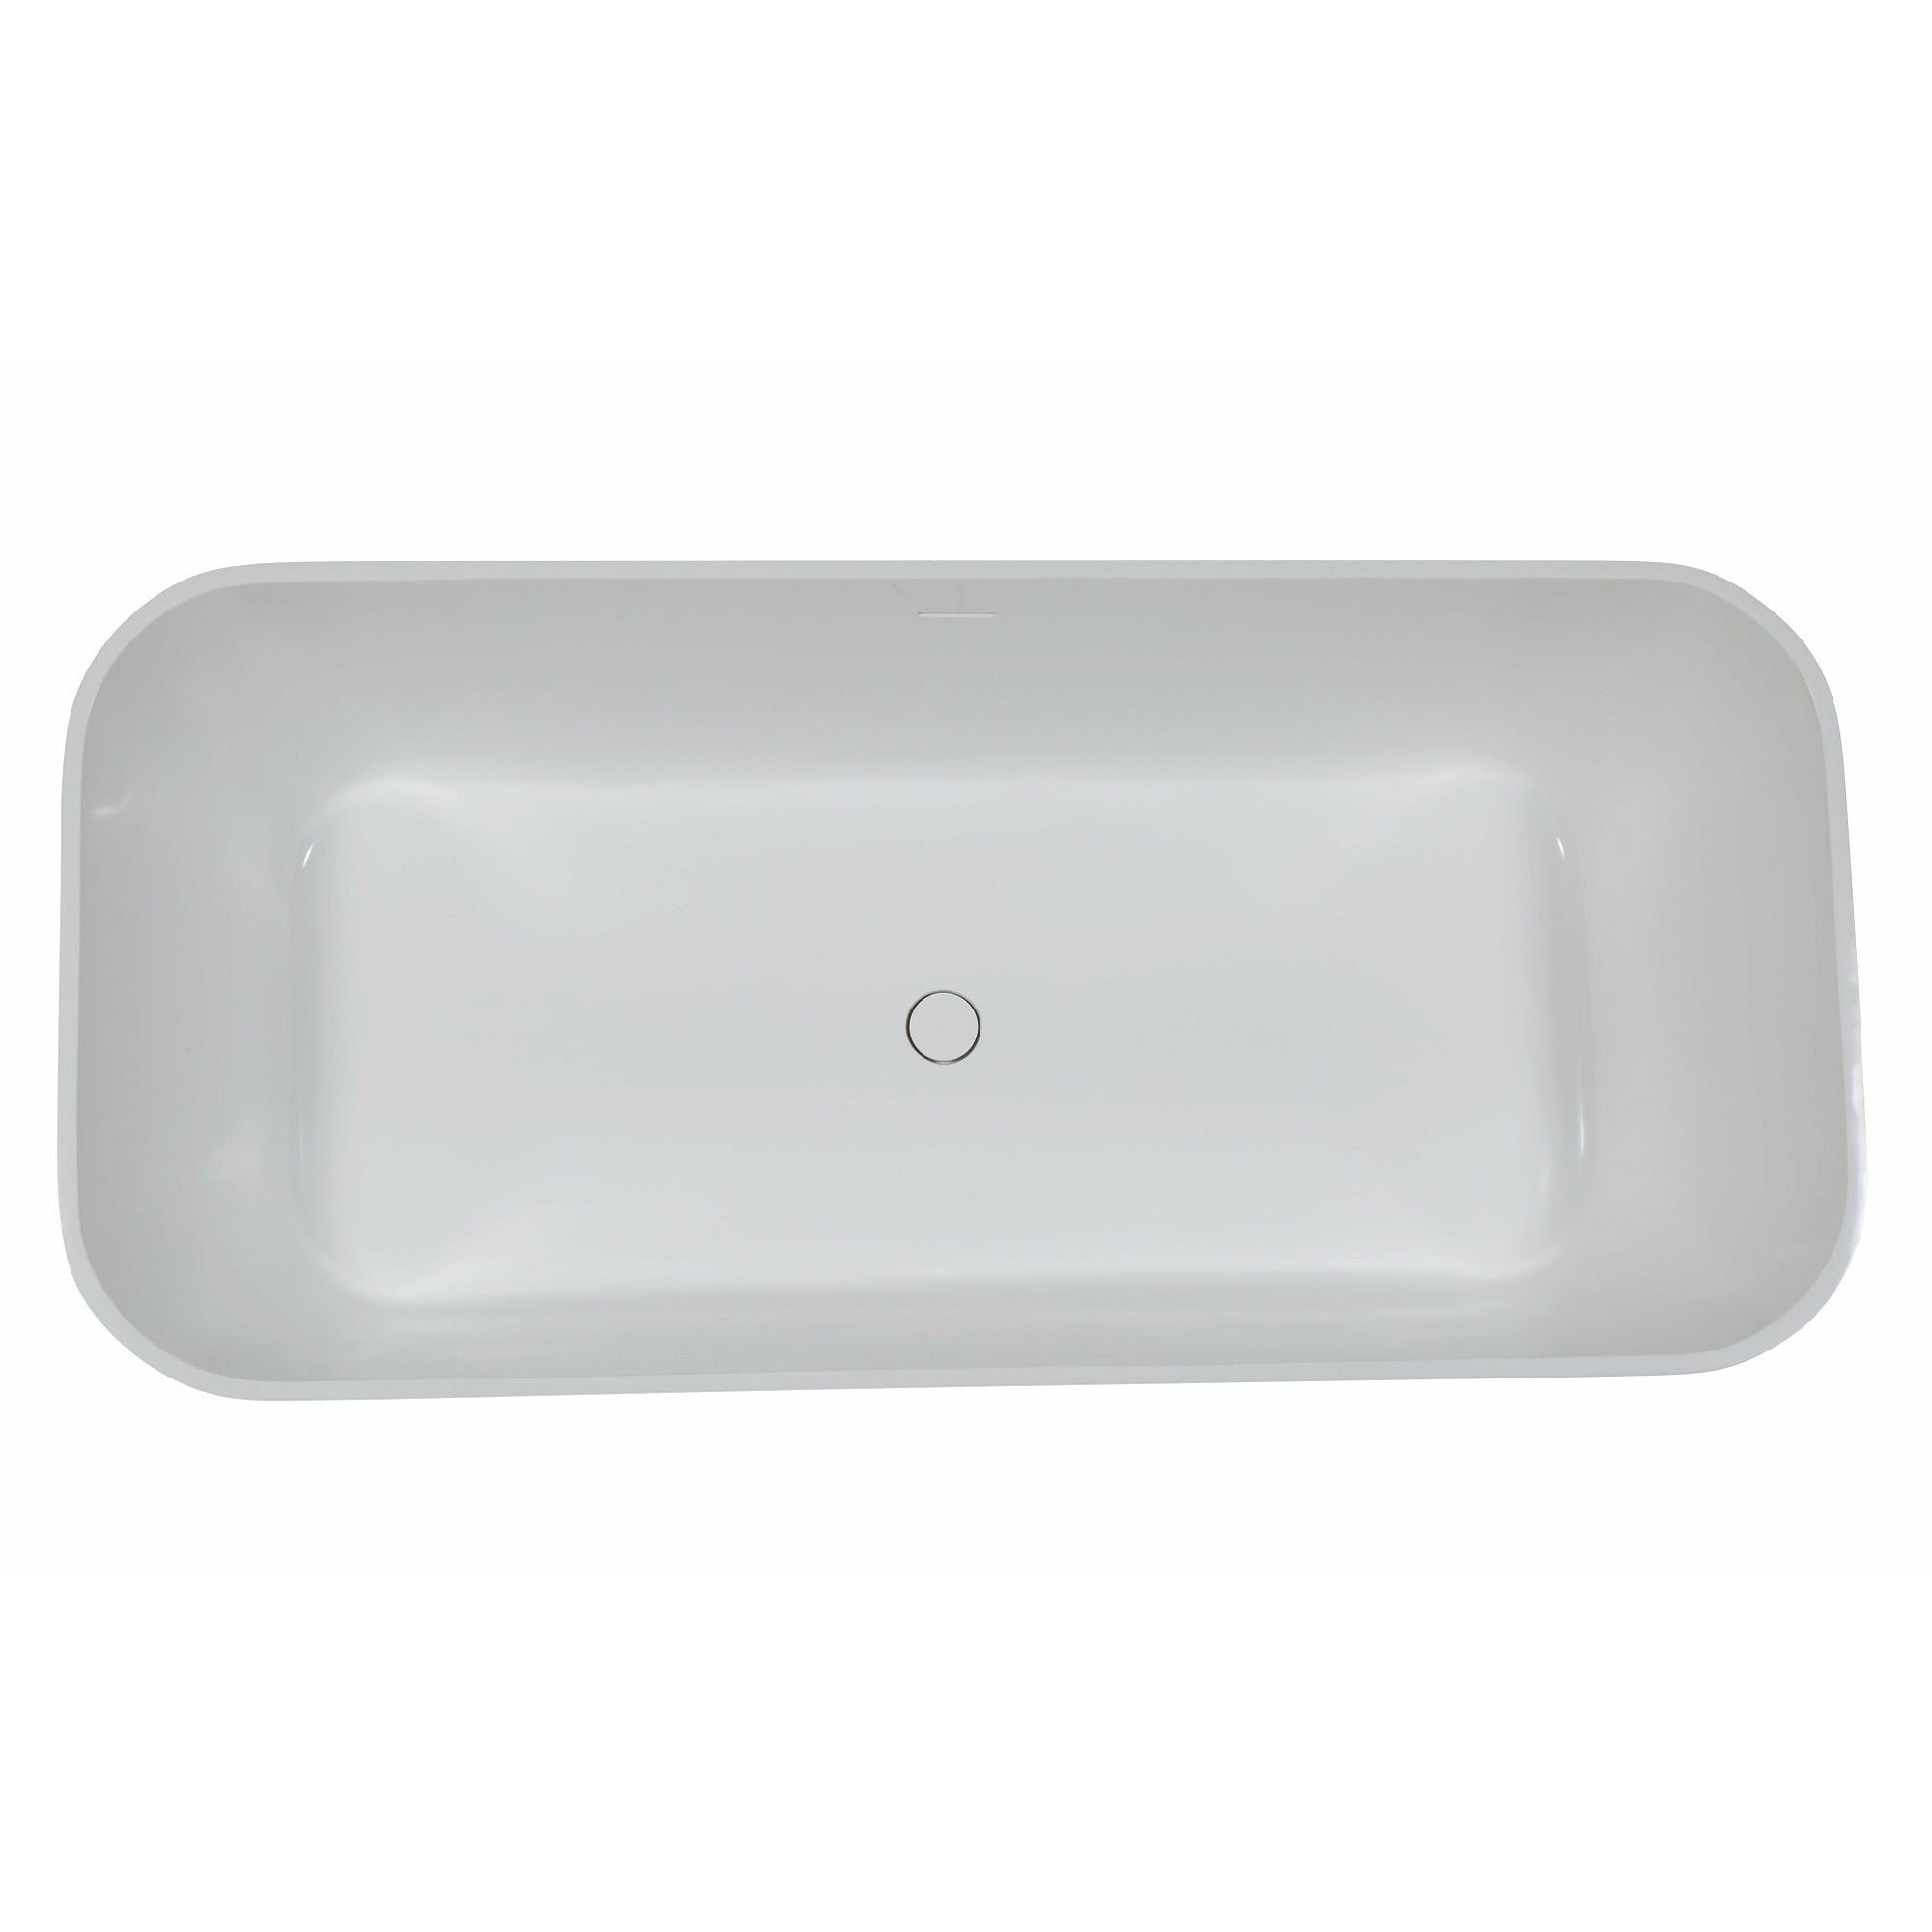 ALFI brand 67" Black & White Matte Rectangular Solid Surface Resin Soaking Bathtub with Smooth Resin Composite Material with a Matte White Finish Inside and a Matte Black Painted Finish on the Outside AB9952BM - Vital Hydrotherapy